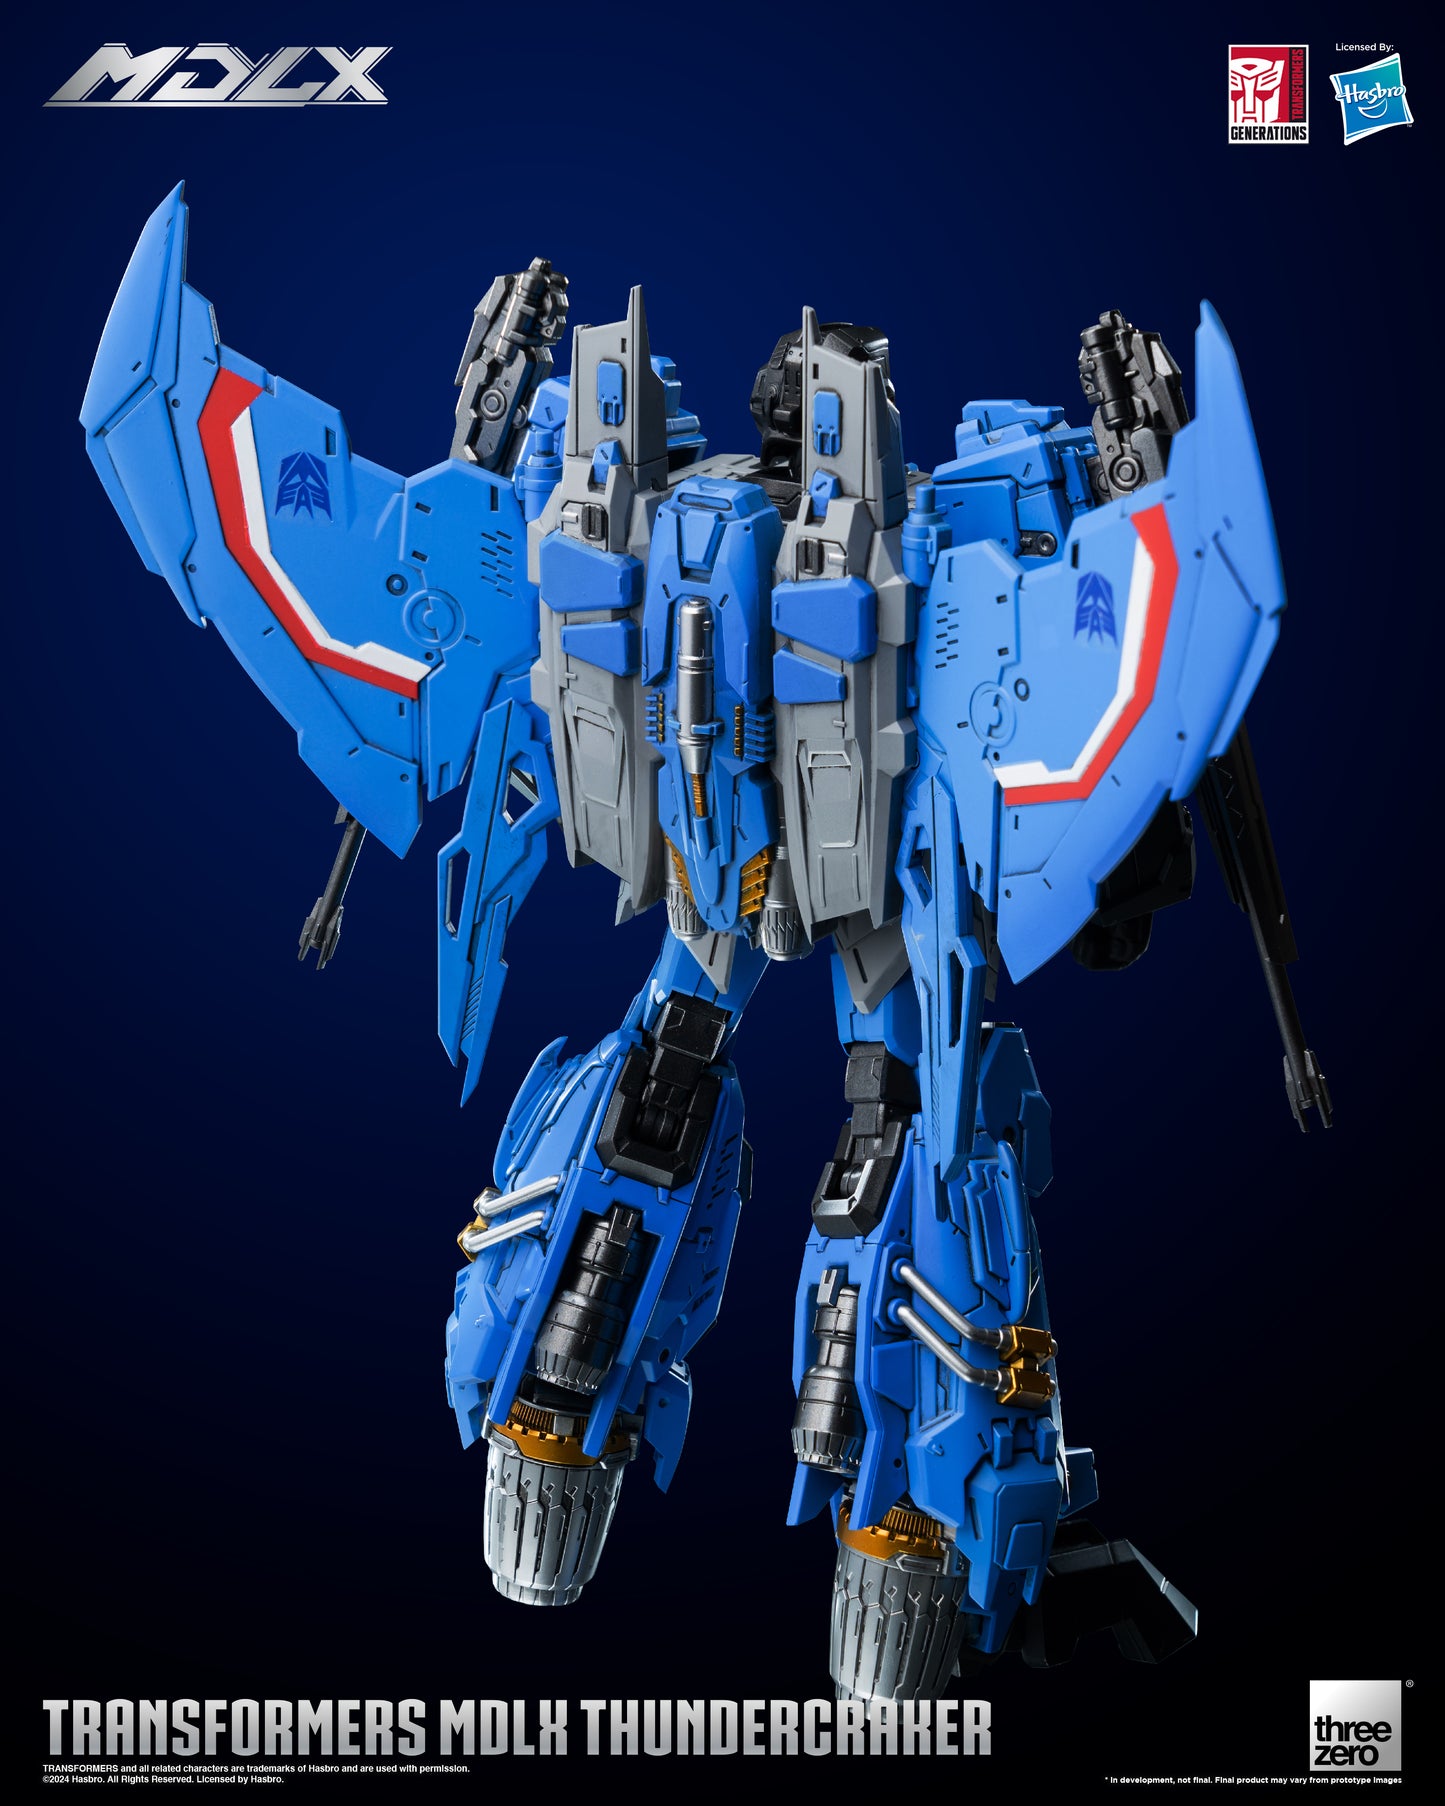 Transformers MDLX Articulated Figure Series Thundercracker back view